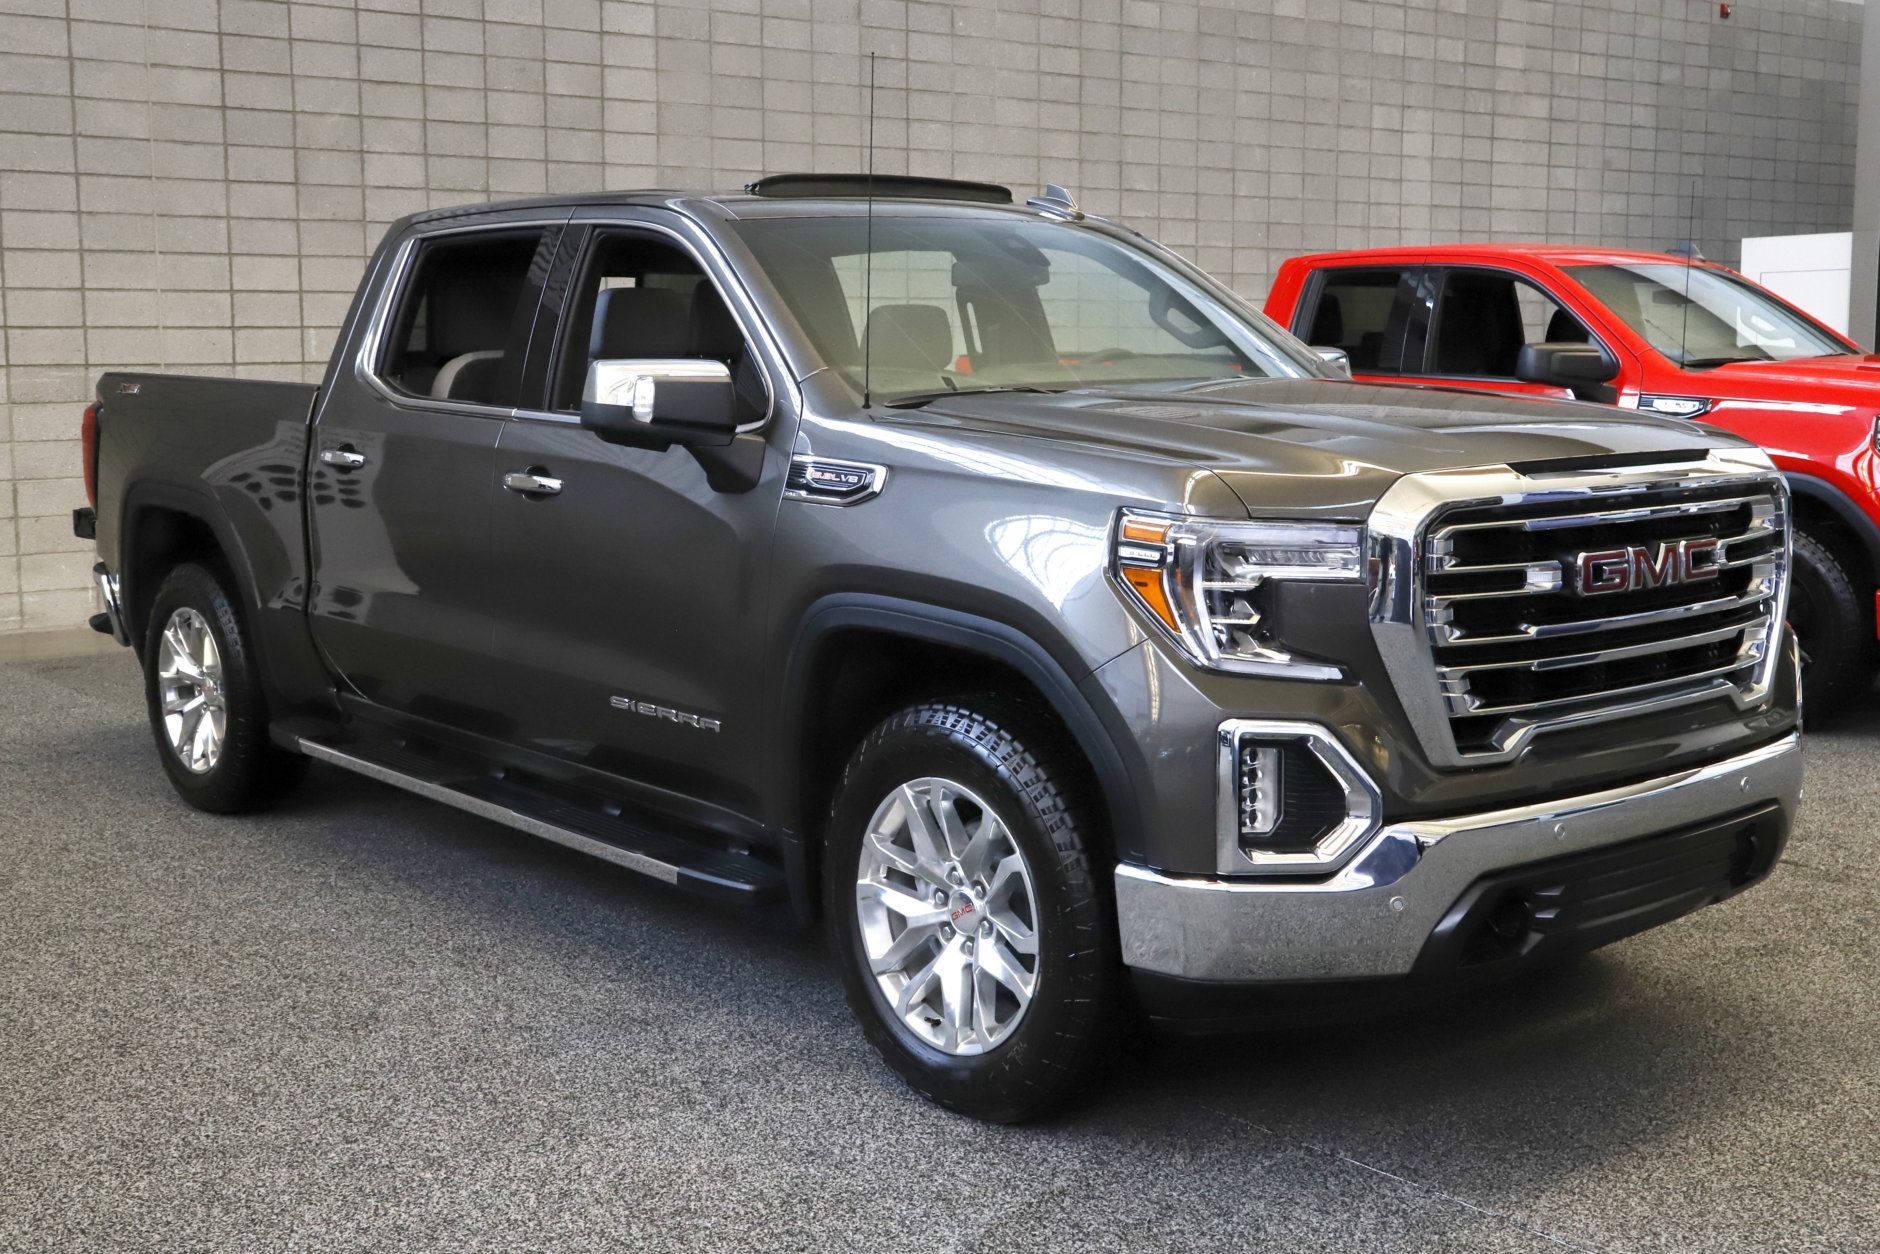 <h3>GMC Sierra 1500 Crew Cab</h3>
<p>Rounding out the top five most stolen cars is GMC&#8217;s popular Sierra 1500 Crew Cab pickup truck. This 4-door behemoth is stolen 3.93 times more often than the national average.</p>
<h2 style="padding-left: 80px;">Top 5 least stolen</h2>
